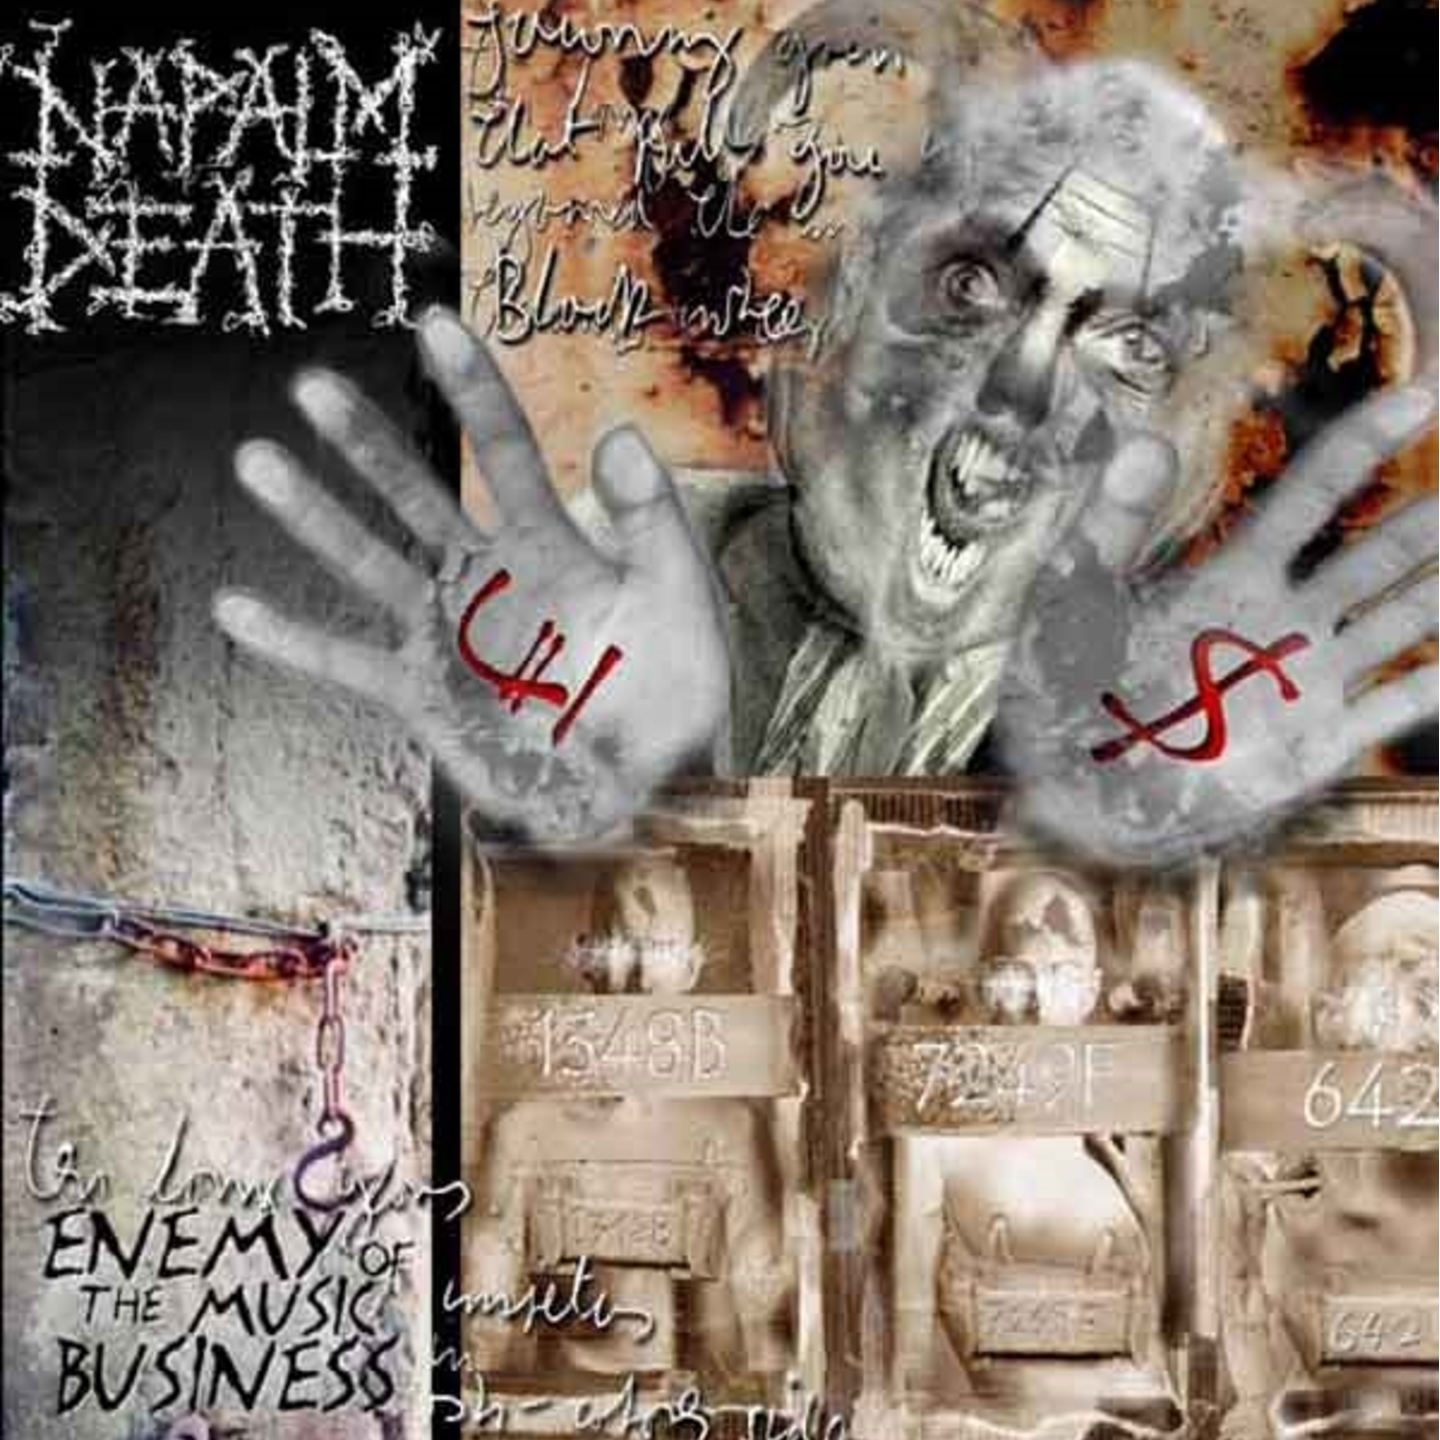 NAPALM DEATH - Enemy Of The Music Business LP